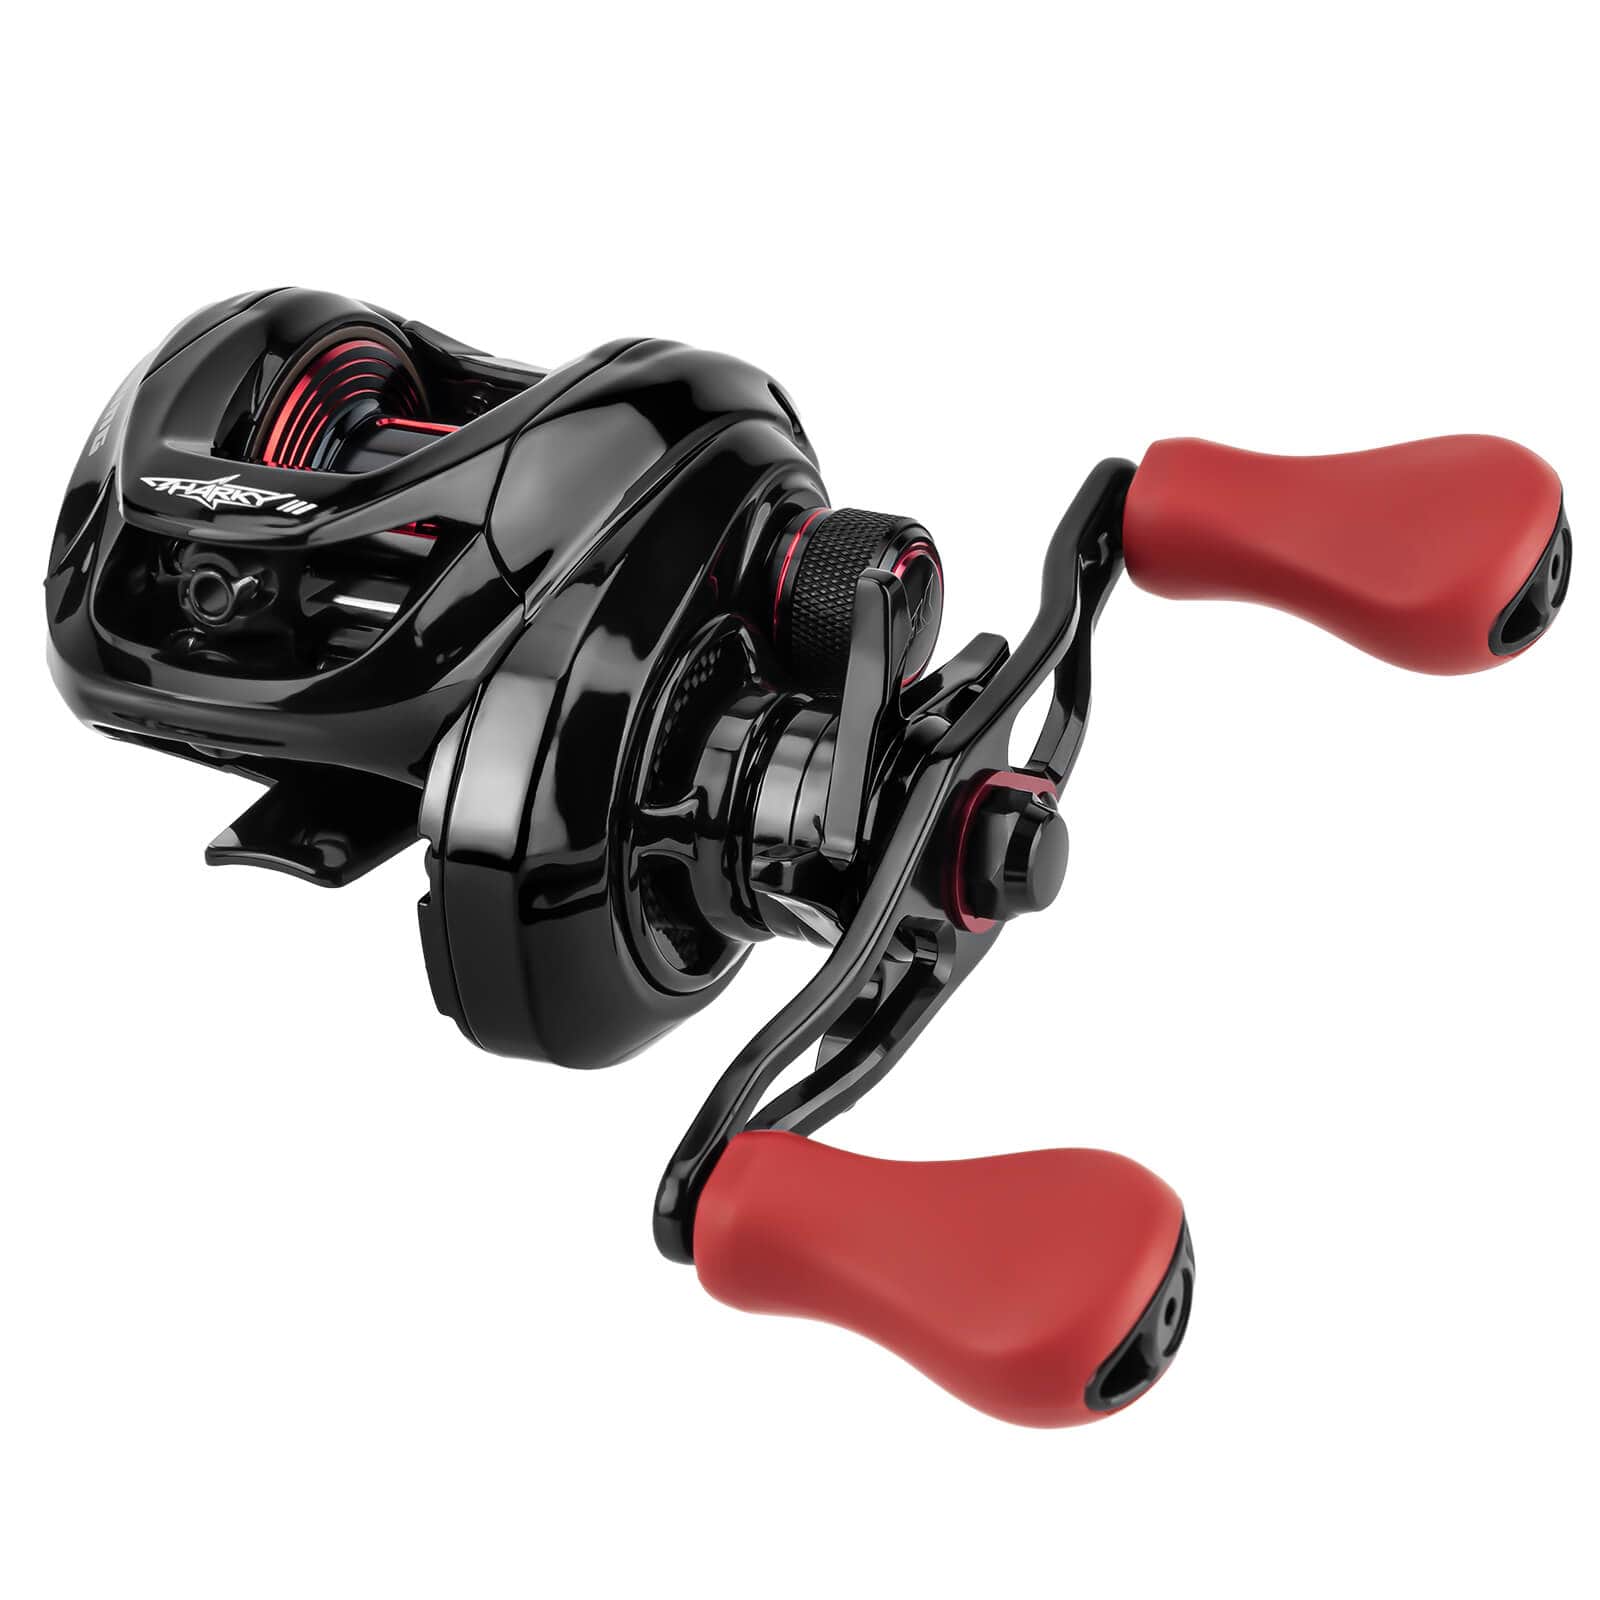 Experience Ultimate Precision and Power with KastKing Megatron Spinning Reel